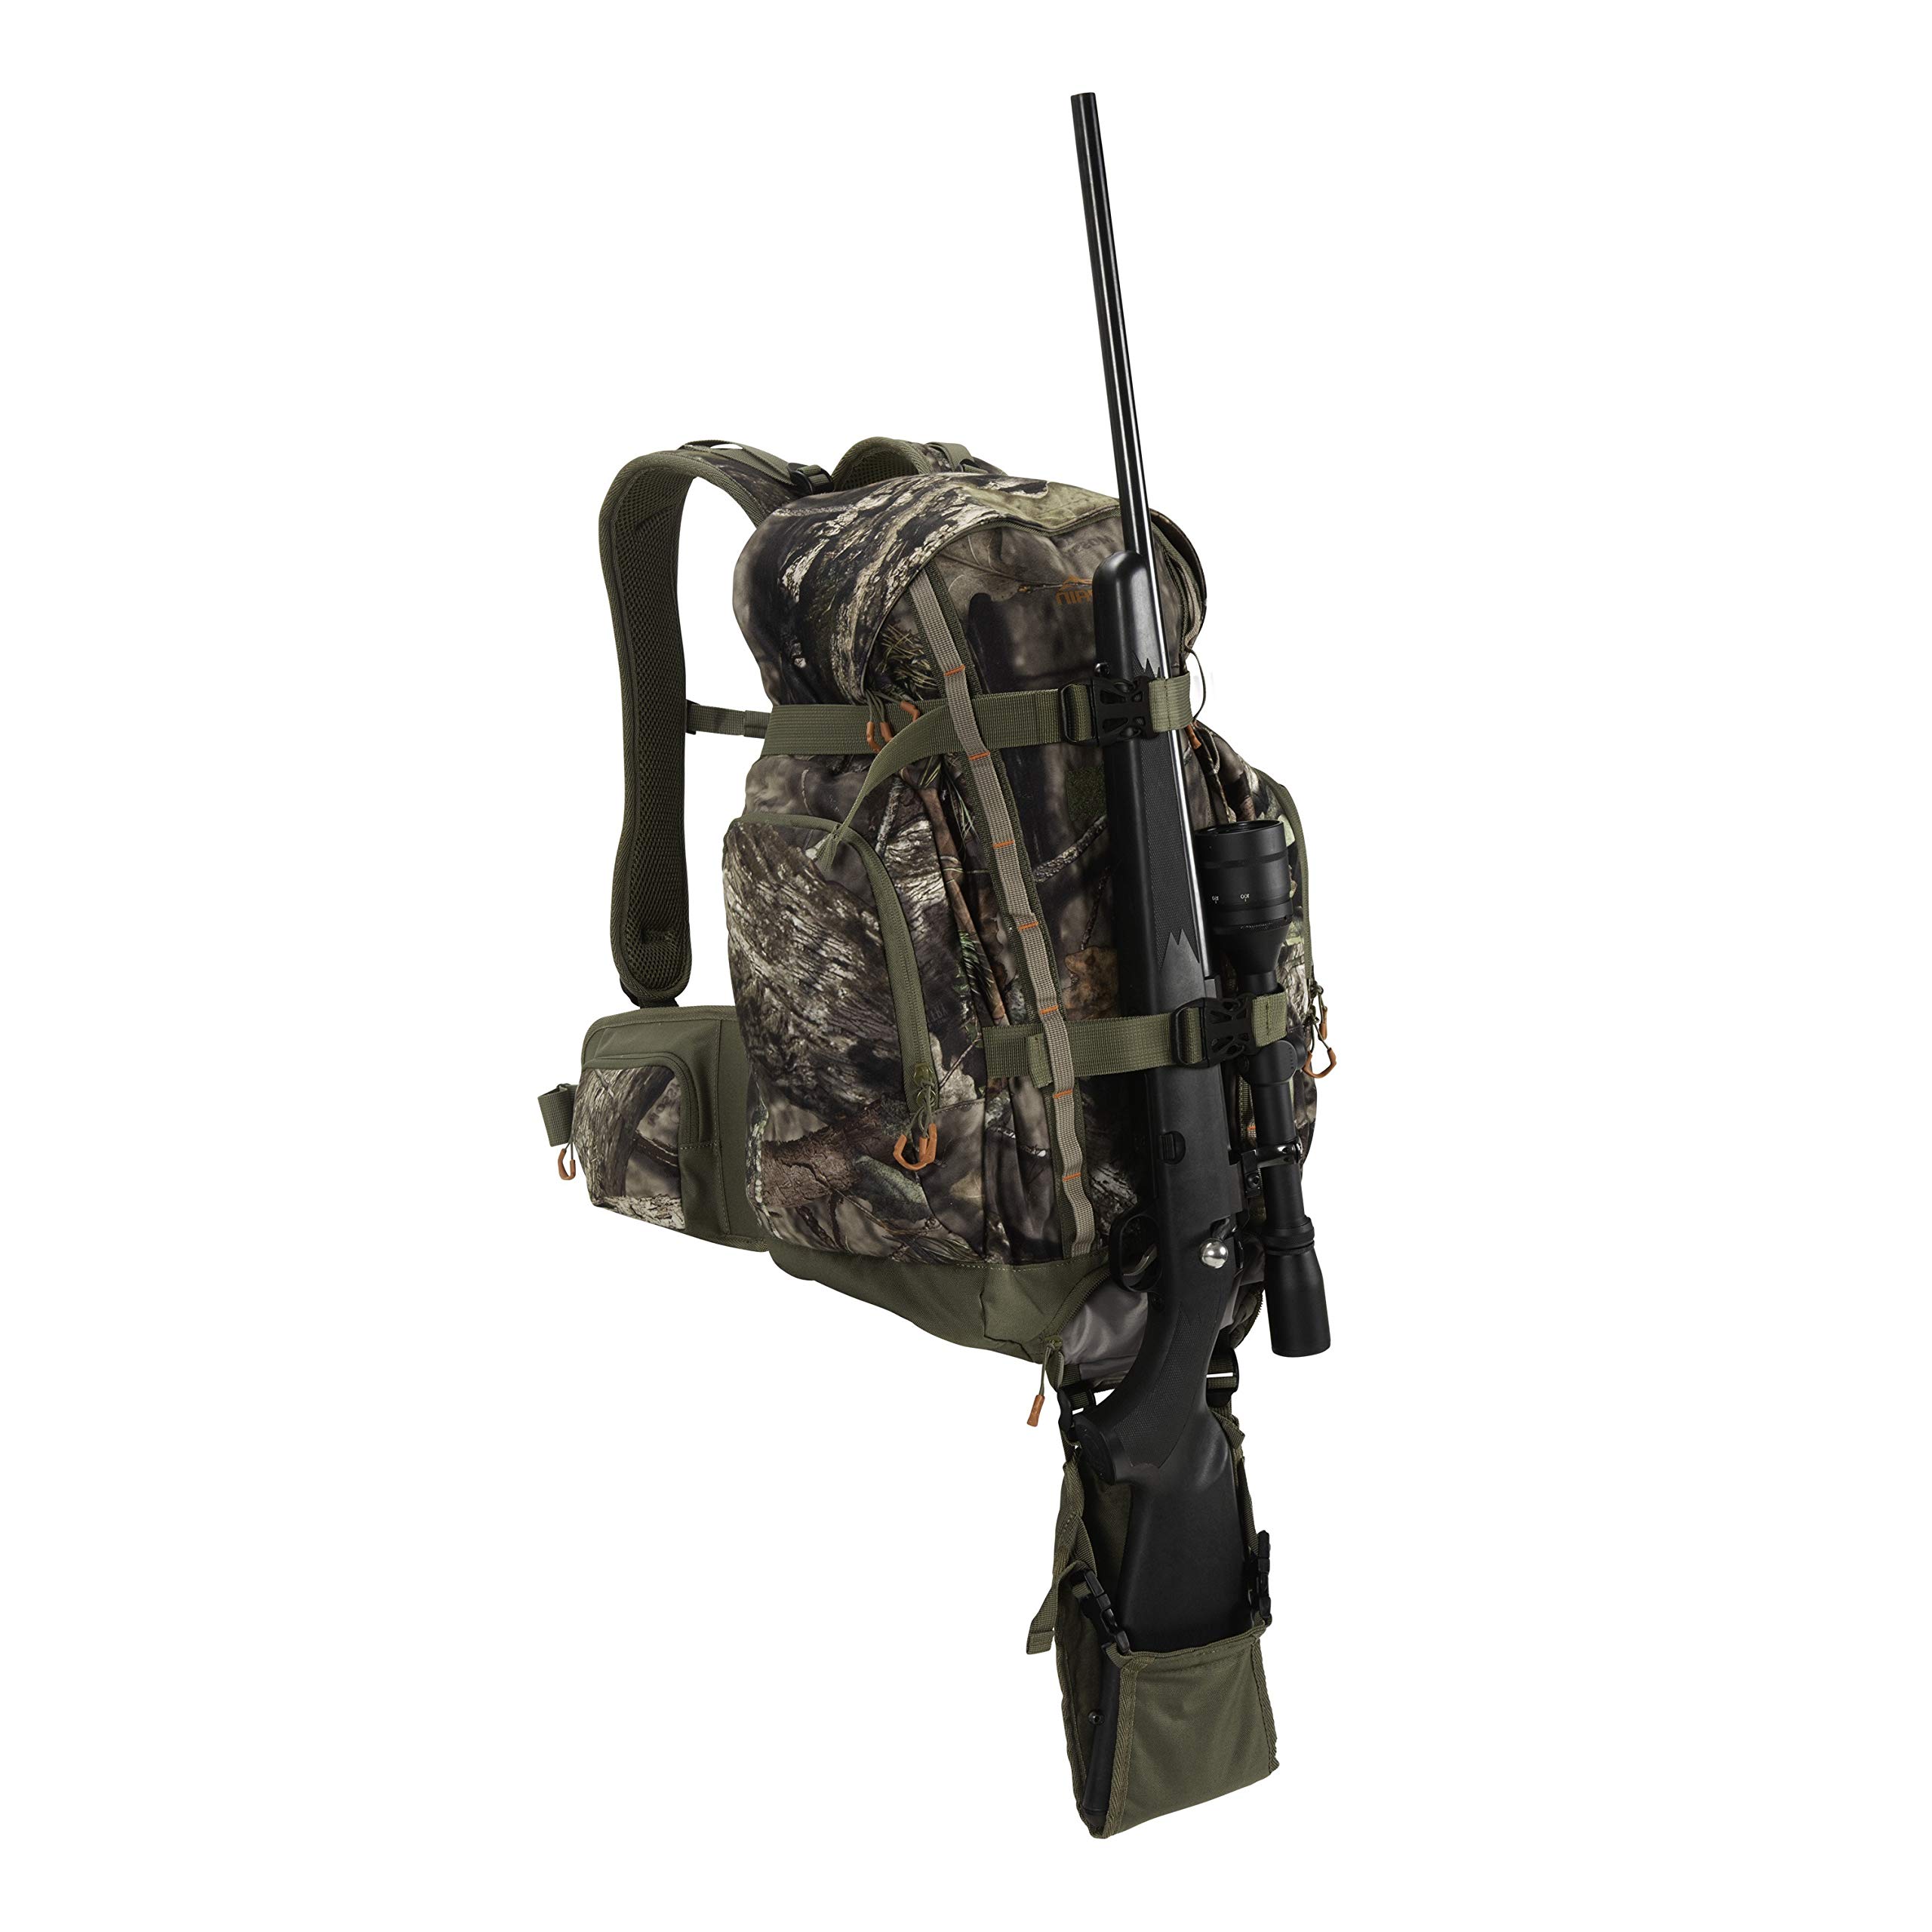 Allen Company unisex adult Knoll Terrain 30L up Daypack, Olive and Mossy Oak Break-Up Country, One Size US